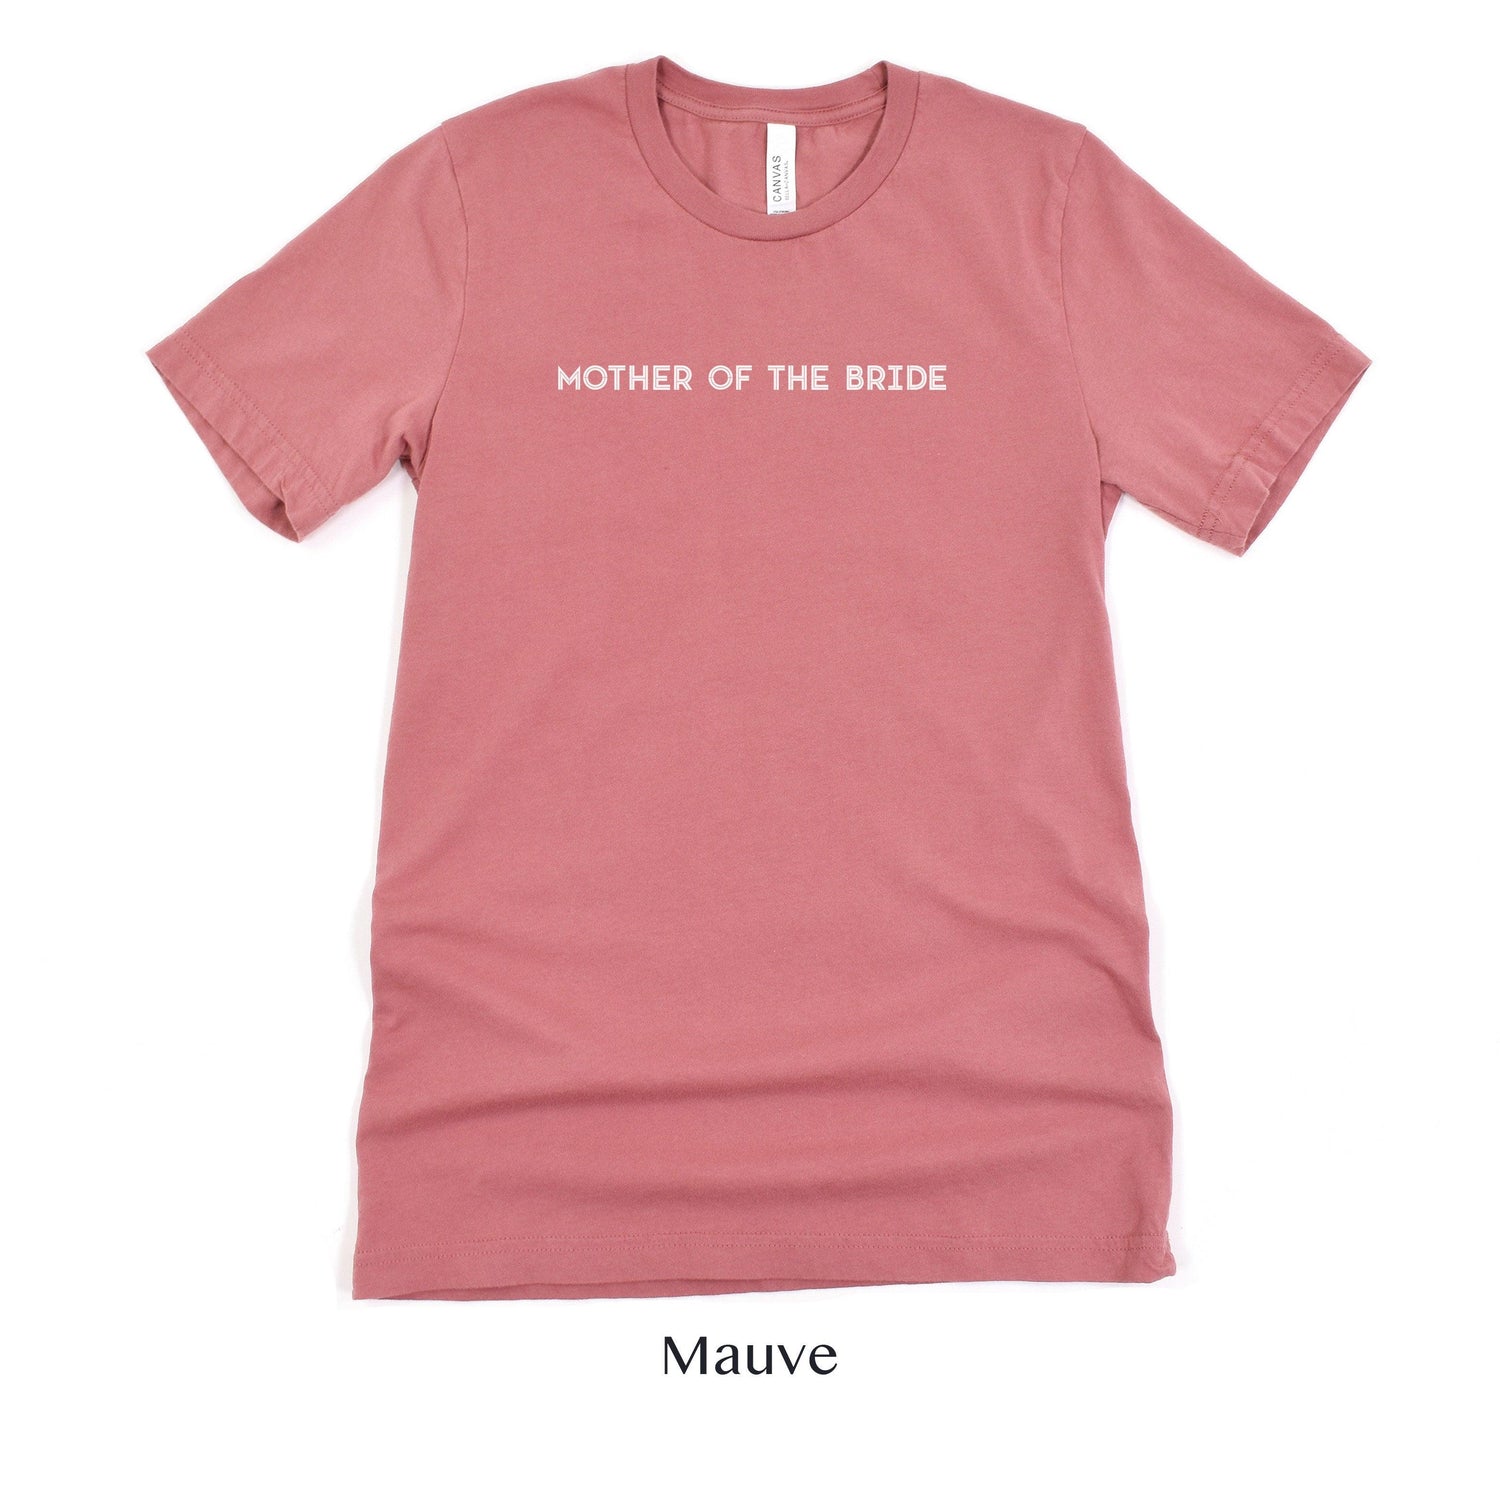 Mother of the Bride Shirt - Matching Wedding Party tshirts - Unisex t-shirt by Oaklynn Lane